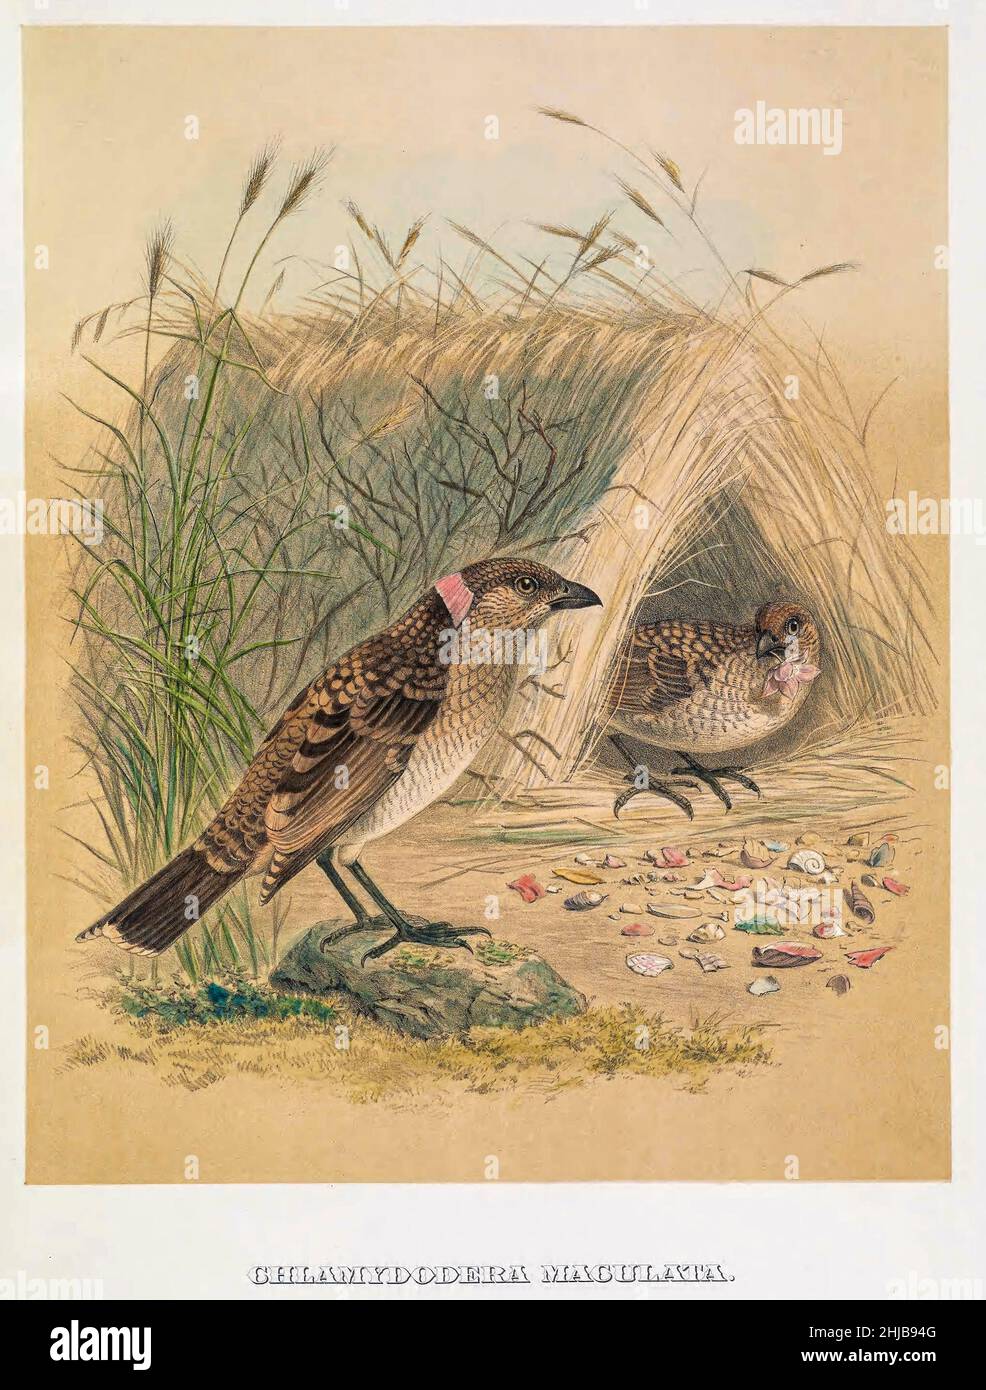 The spotted bowerbird (Chlamydera maculata here as Chlamydodera maculata) is a sedentary, mid-sized passerine found across broad parts of the drier habitats of eastern Australia. The species is known for its remarkable behaviours, like many other bowerbirds (Ptilonorynchidae), which include bower building and decorating, courtship displays and vocal mimicry. Spotted bowerbirds are locally common, however, overall the population is thought to be in decline. tinted lithograph Illustrated by Joseph Smit, from the book ' The beautiful and curious birds of the world ' by Charles Barney Cory, Publis Stock Photo